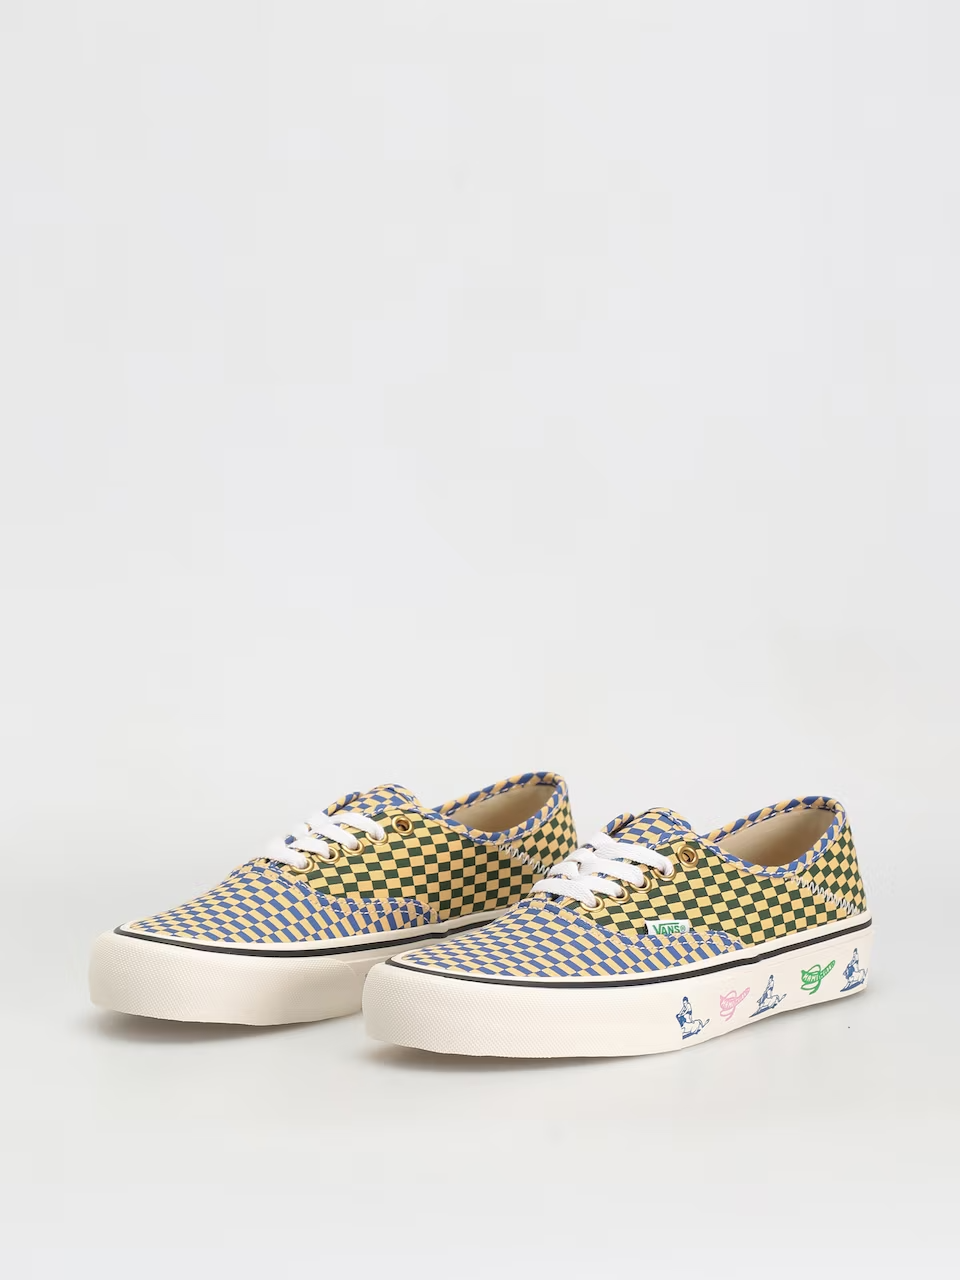 Mami Wata Authentic VR3 SF Shoes